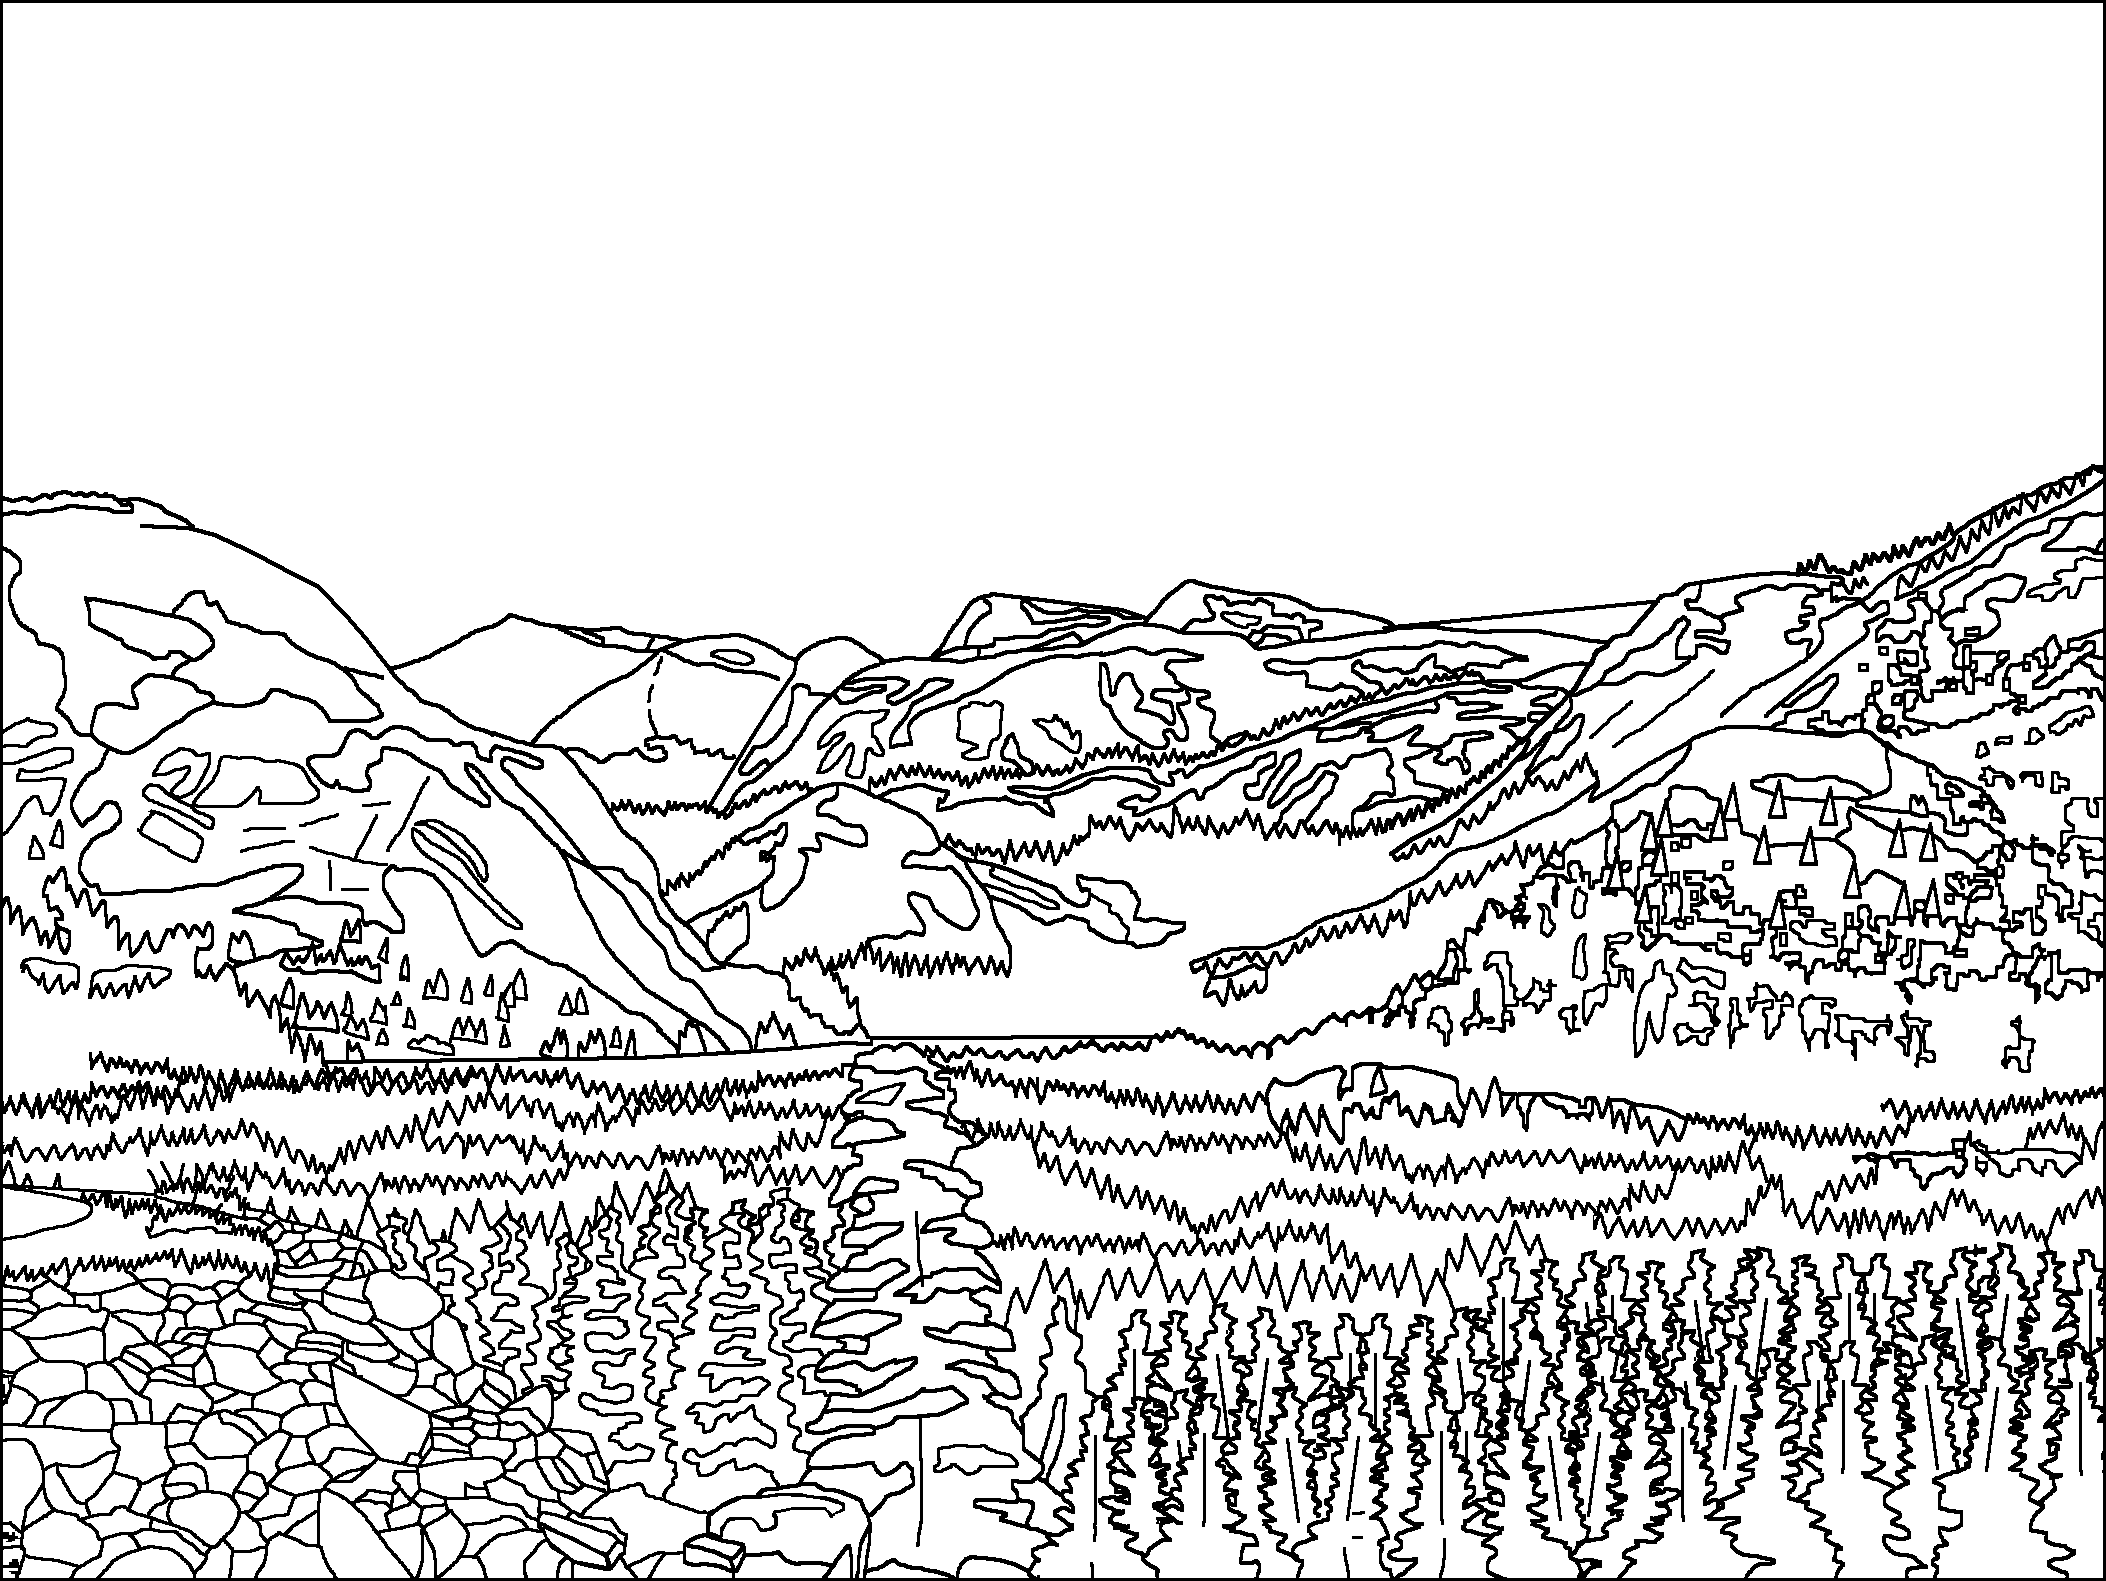 Free Coloring Pages Mountain, Download Free Coloring Pages Mountain png